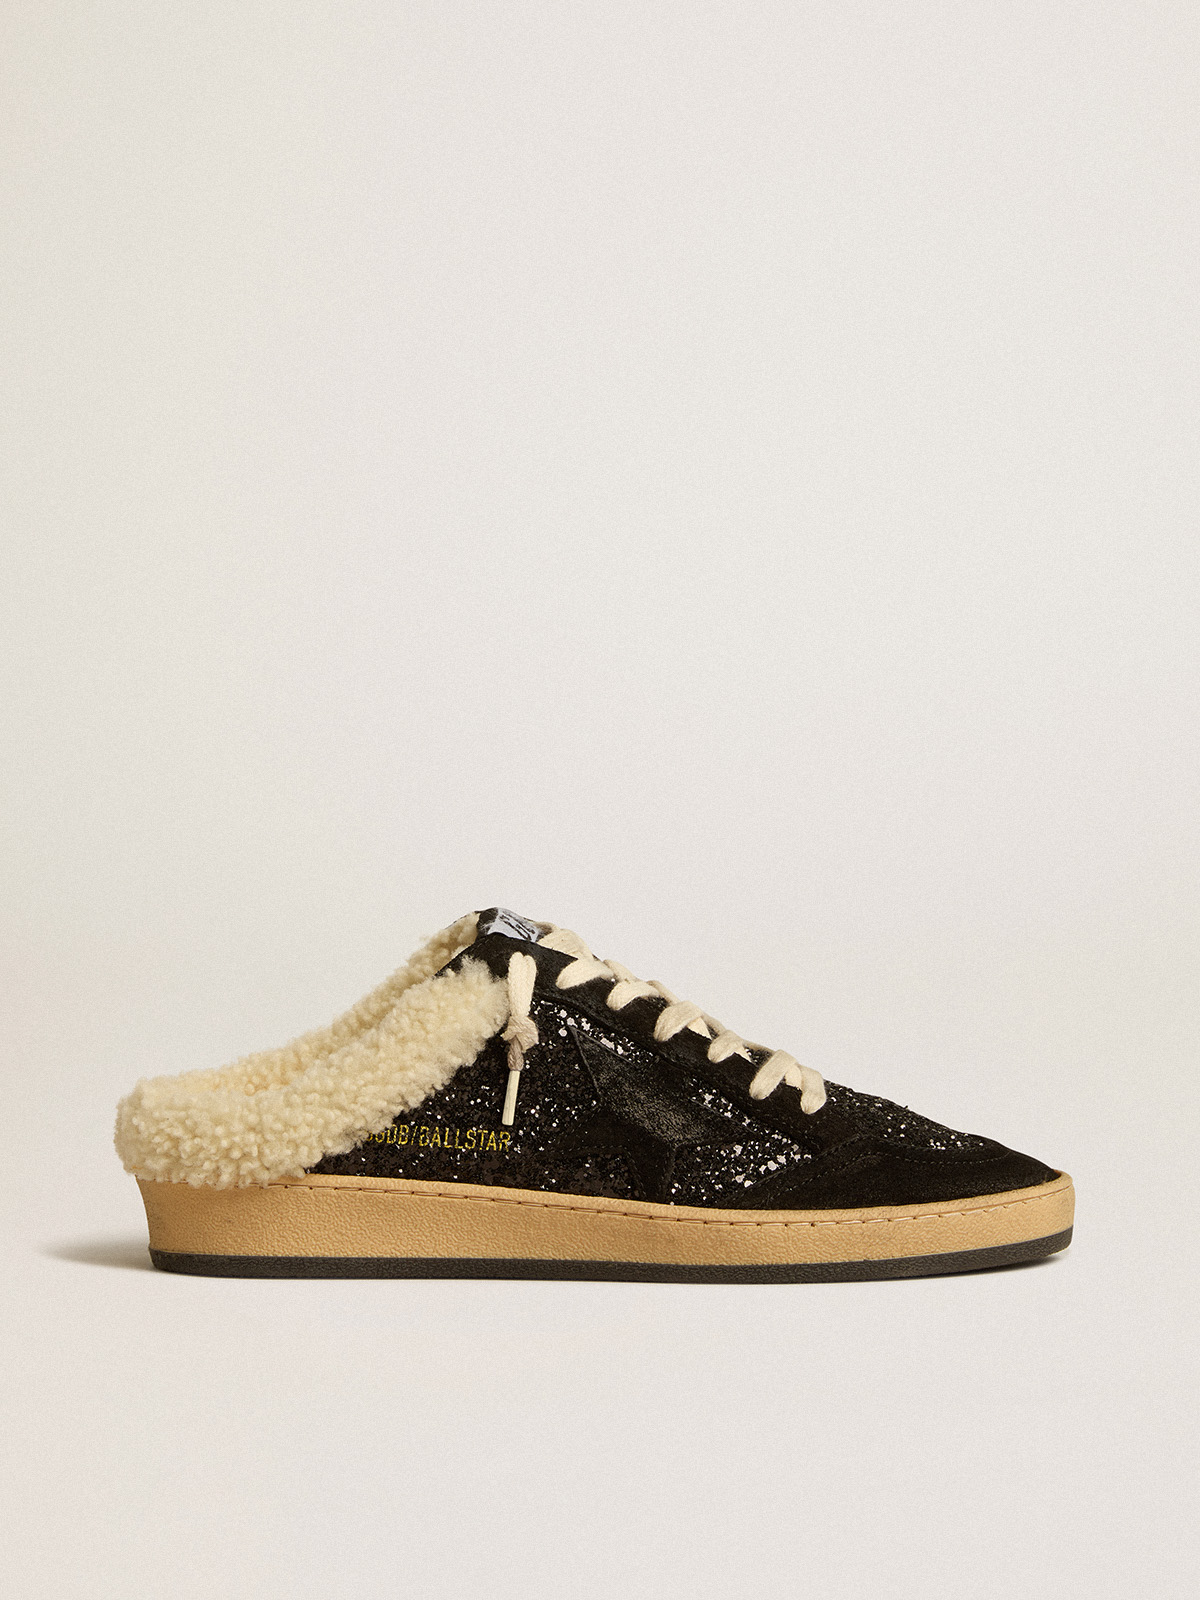 Ball Star Sabots in black glitter with black star and shearling lining |  Golden Goose